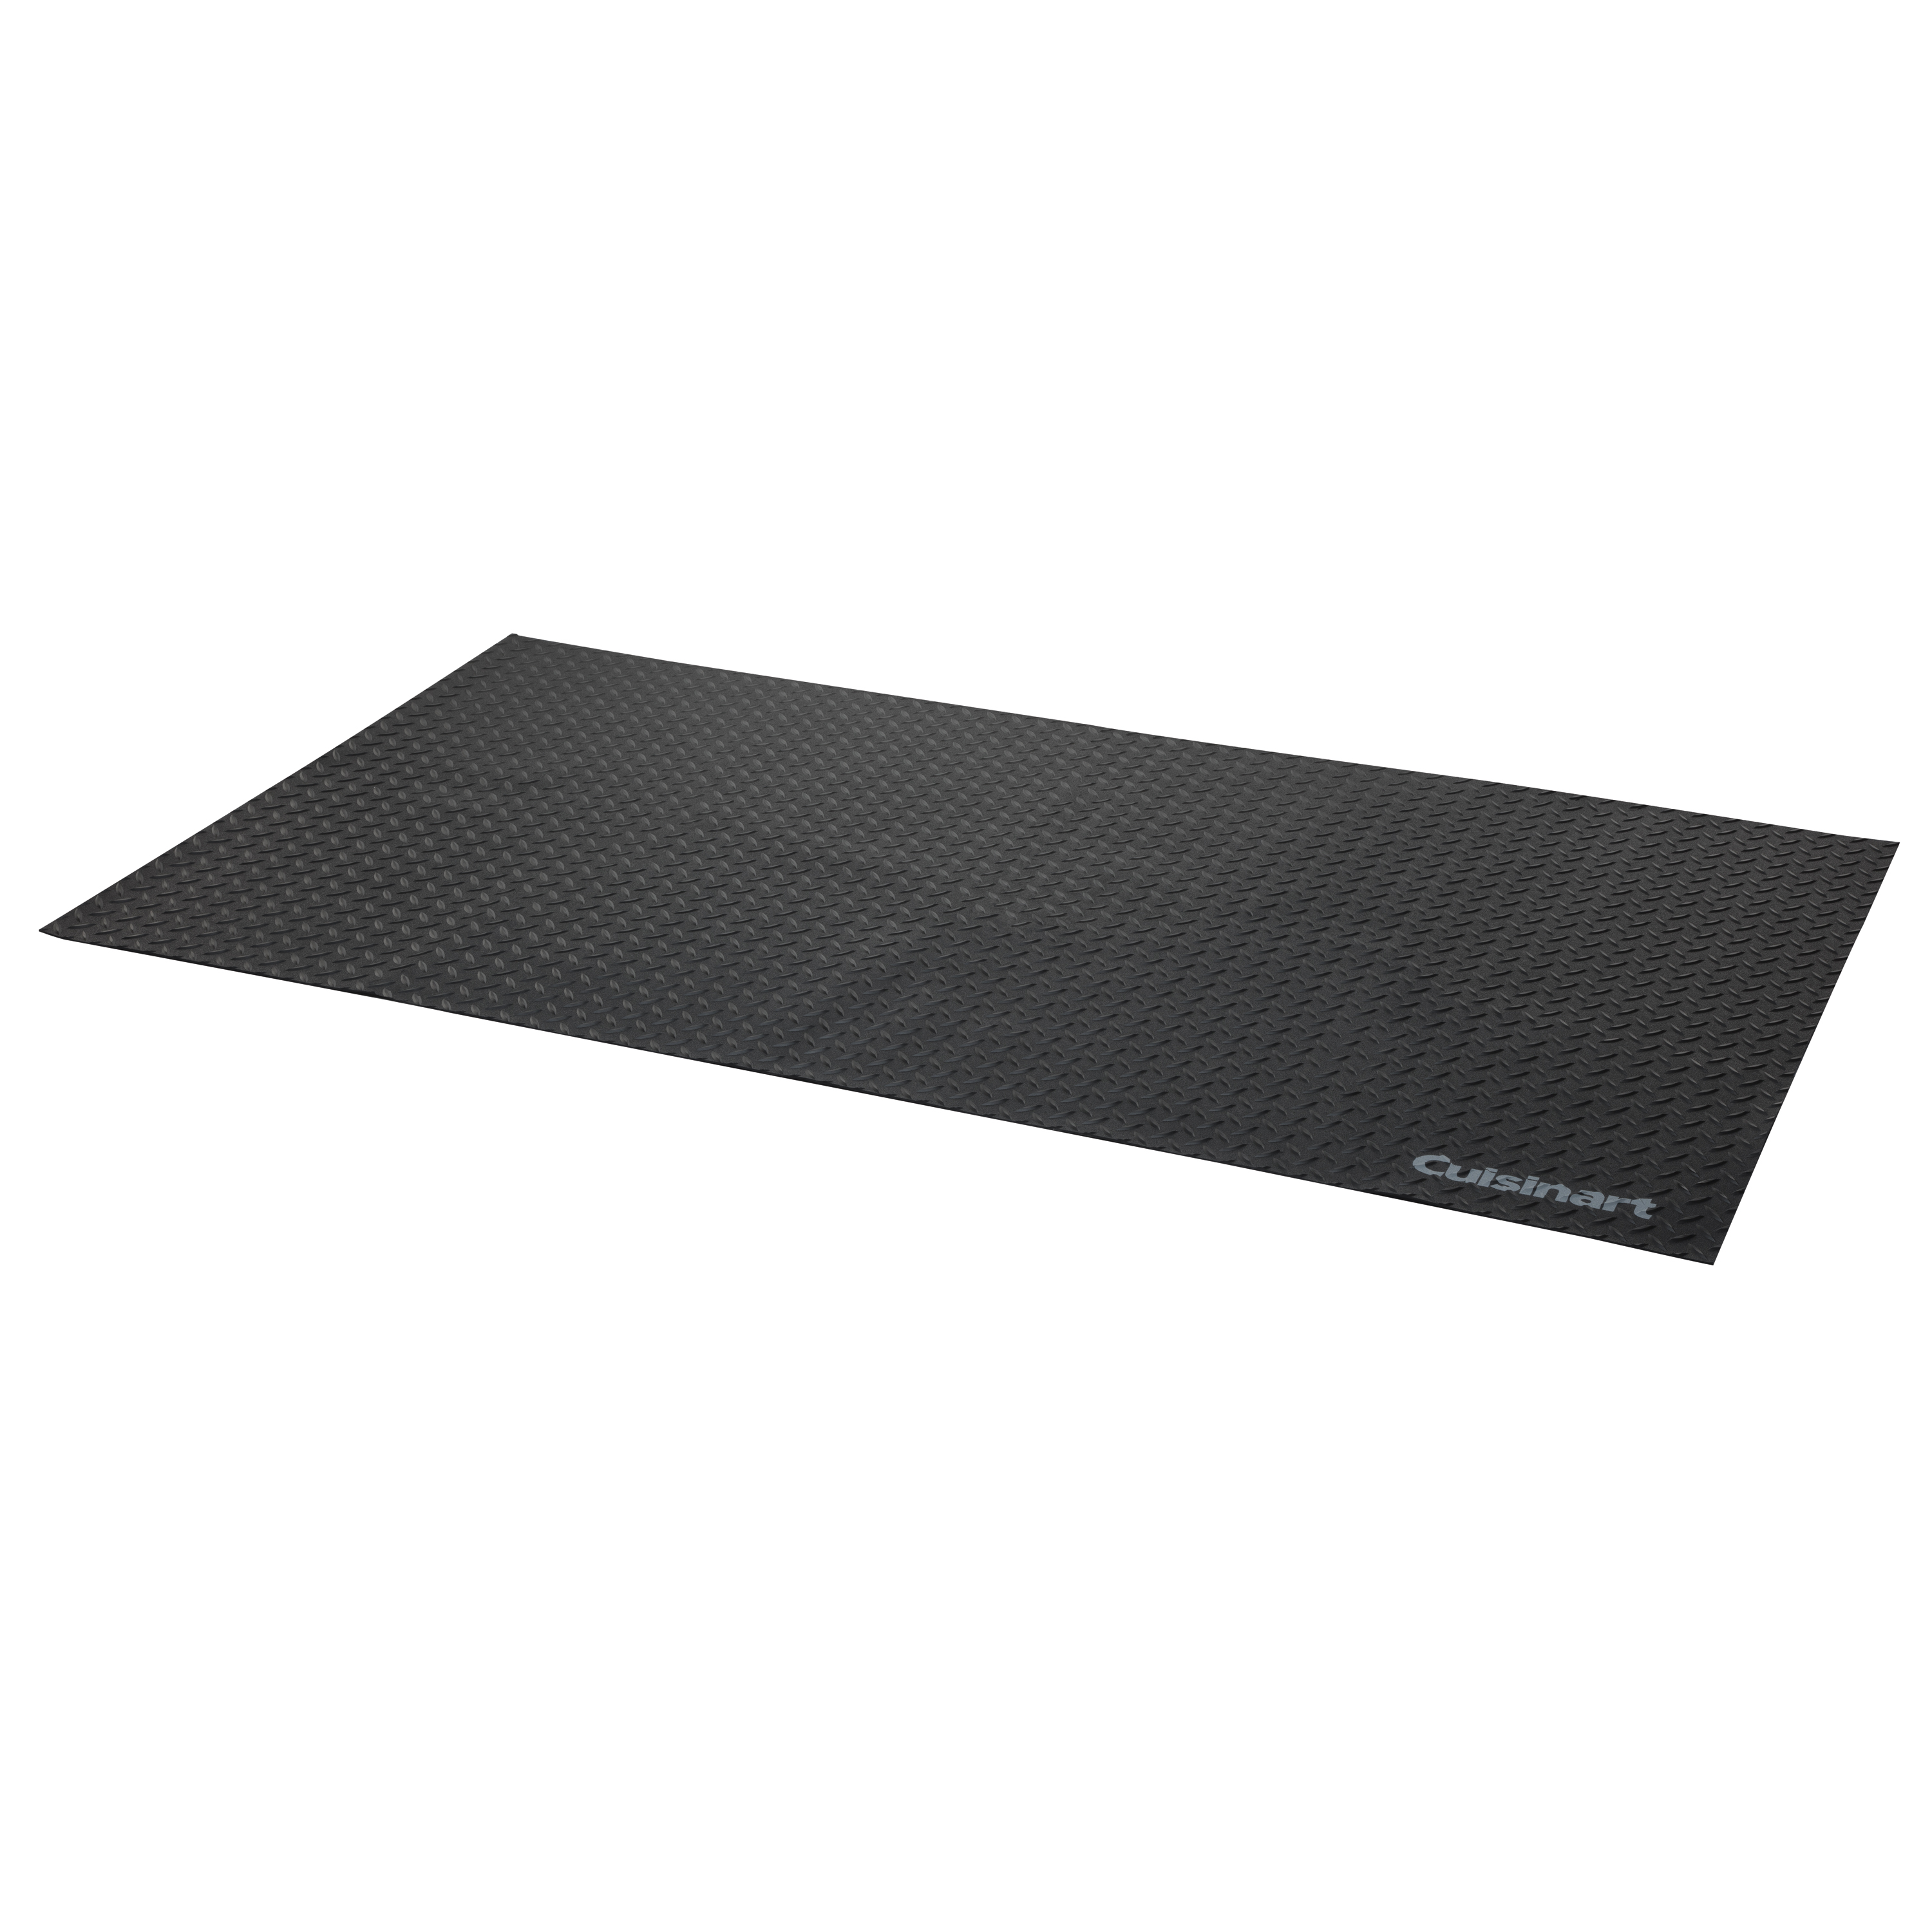 Cuisinart 65-In. x 36-In. Premium Deck and Patio Grill Mat, Black - image 1 of 7